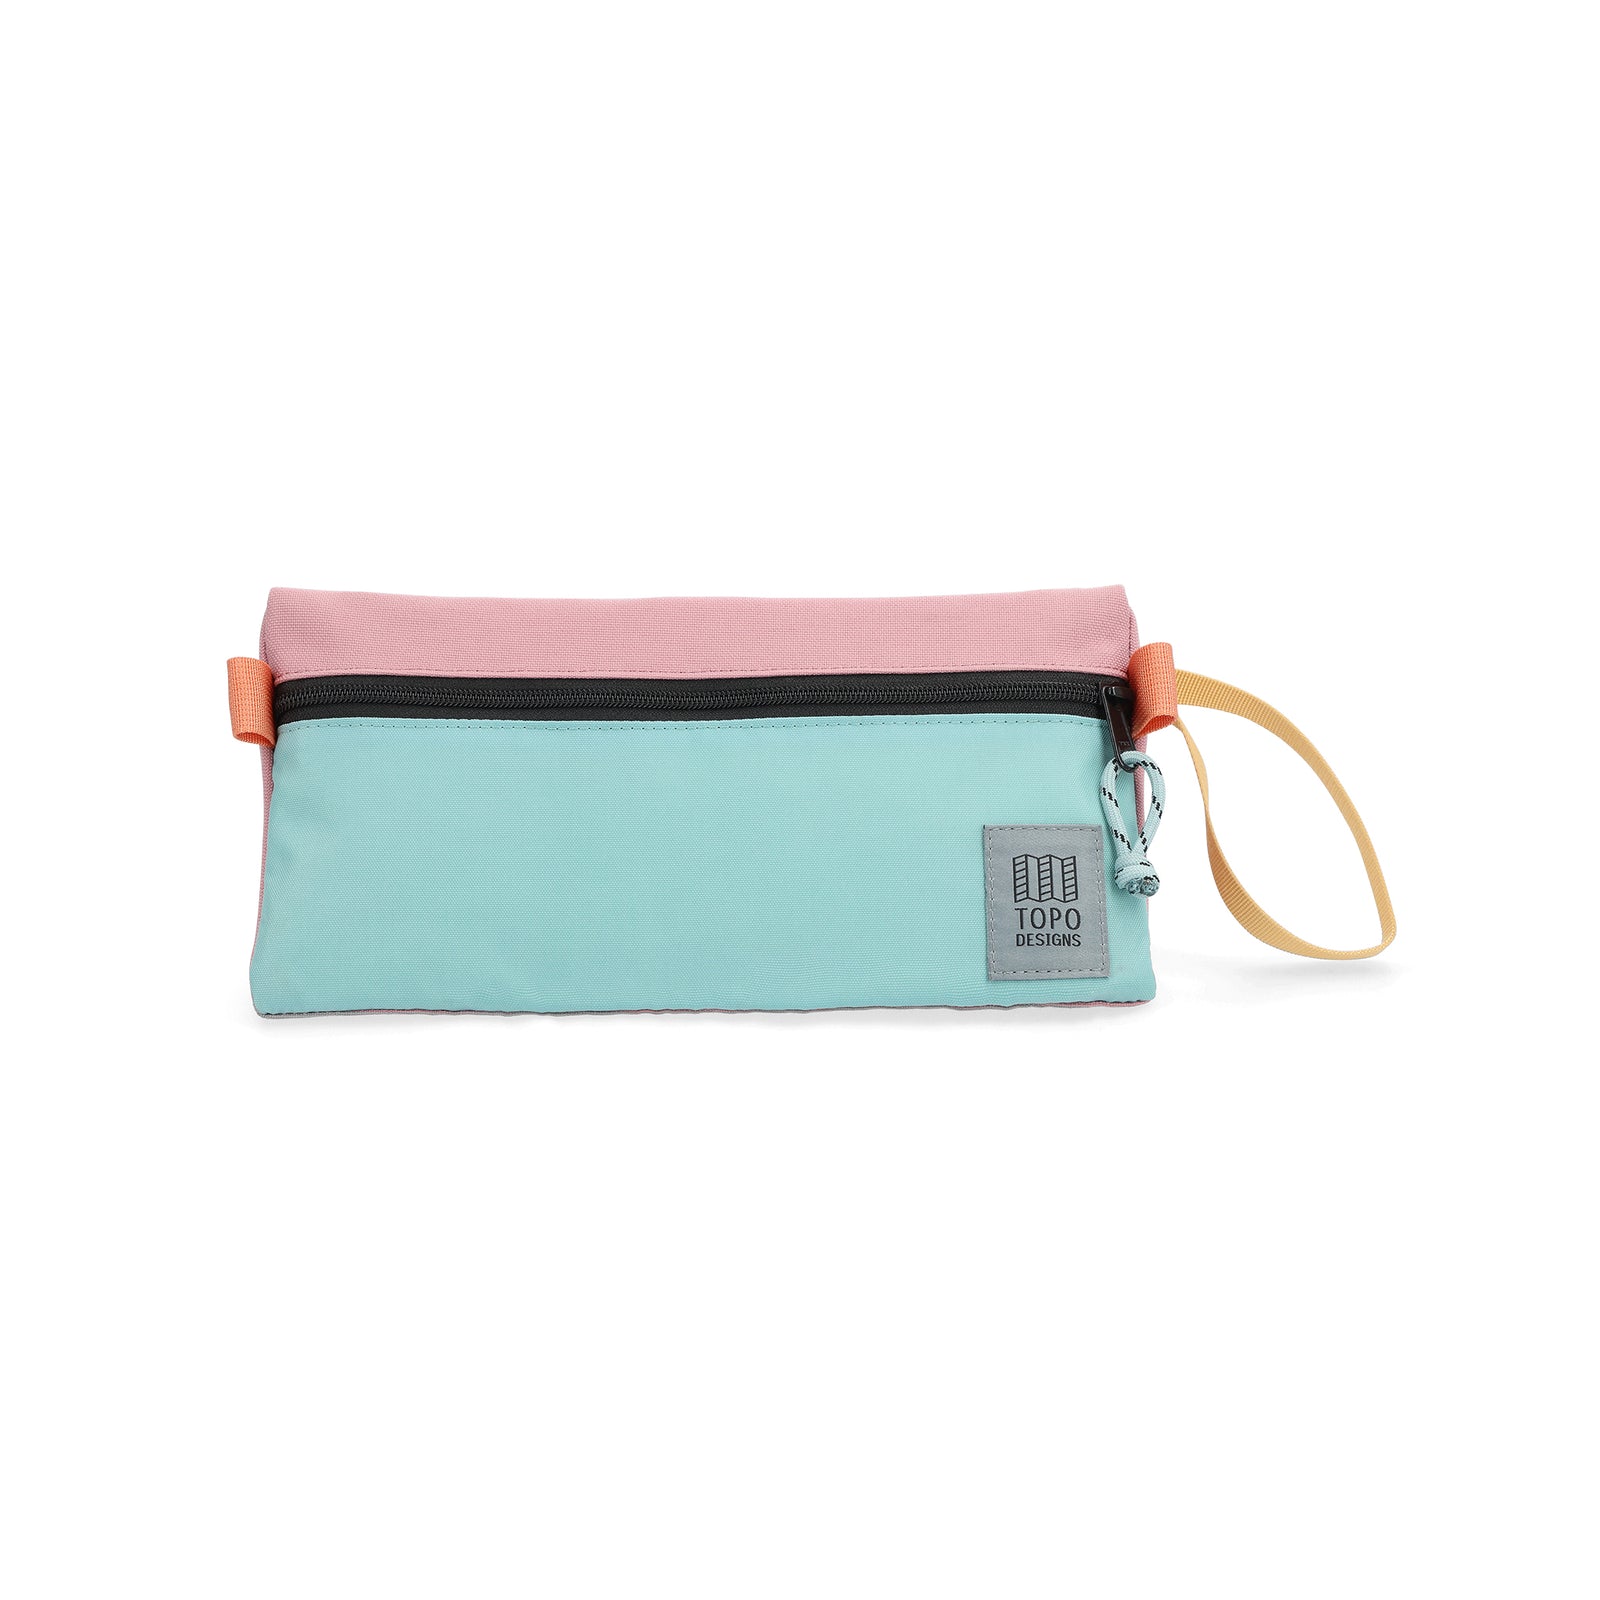 Front View of Topo Designs Dopp Kit in "Rose / Geode Green"